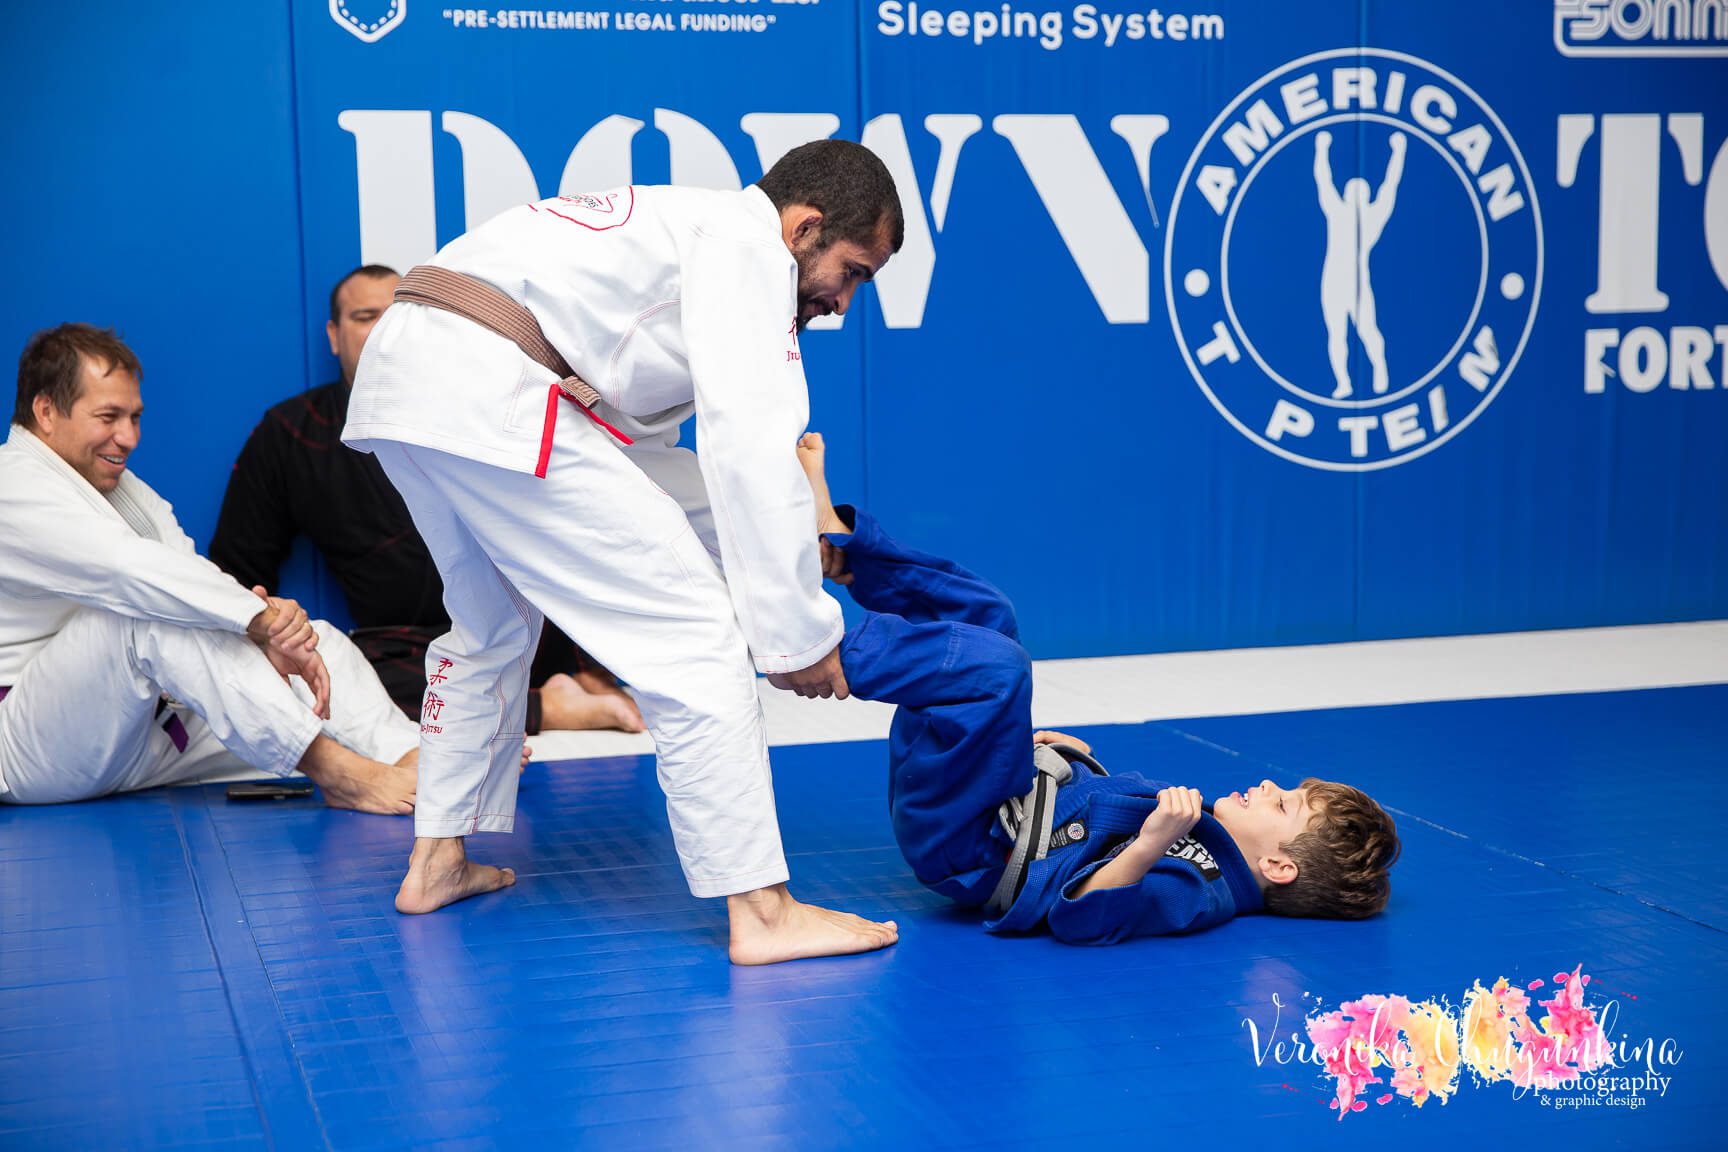 You are currently viewing Ft. Lauderdale Back to School BJJ Classes